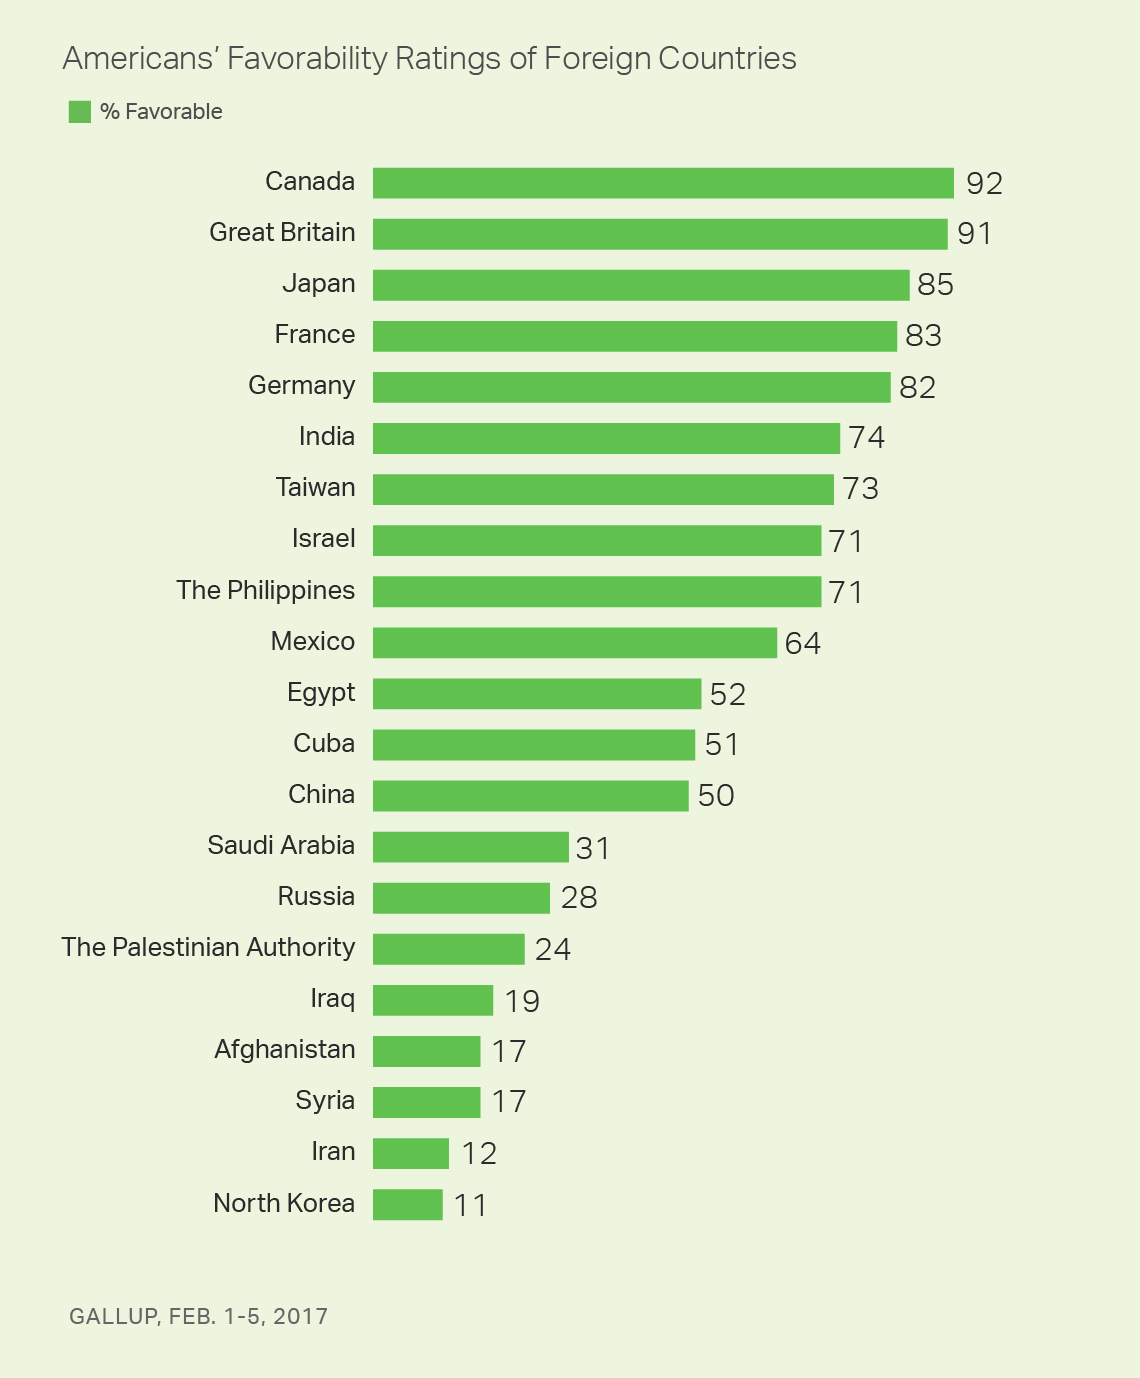 Americans' Favorability Ratings of Foreign Countries